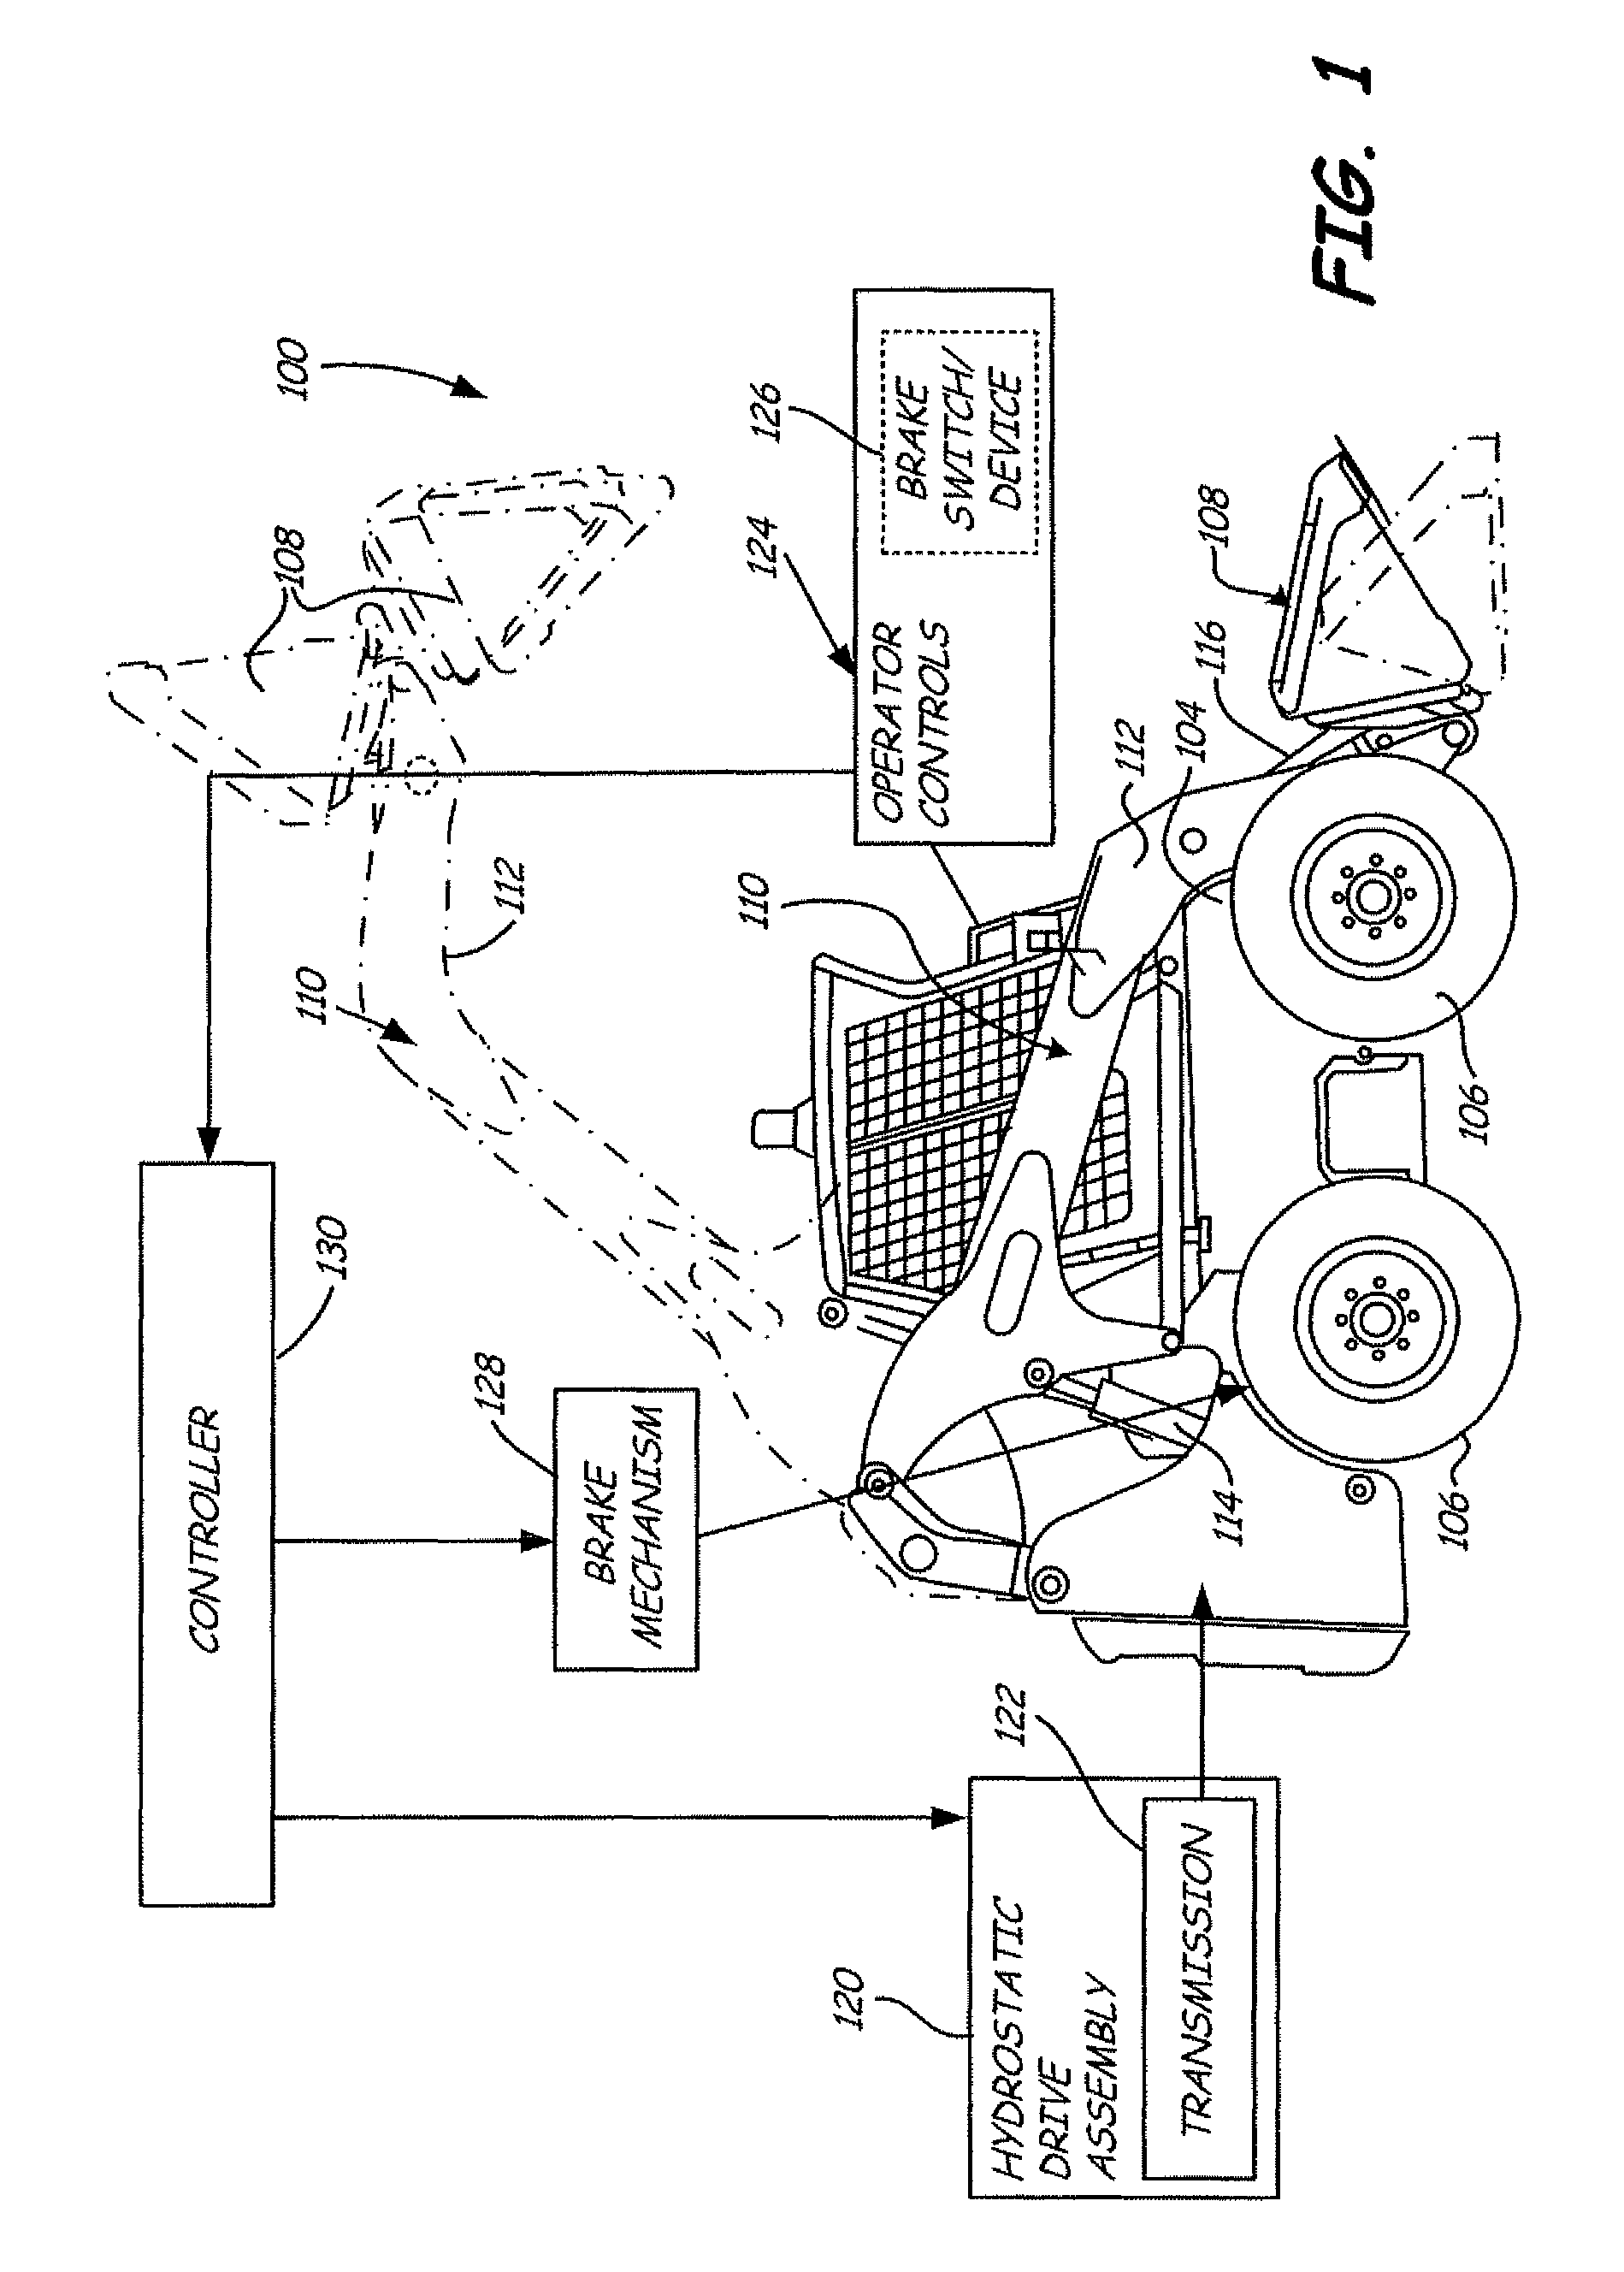 Shift assisted braking for a power machine or vehicle